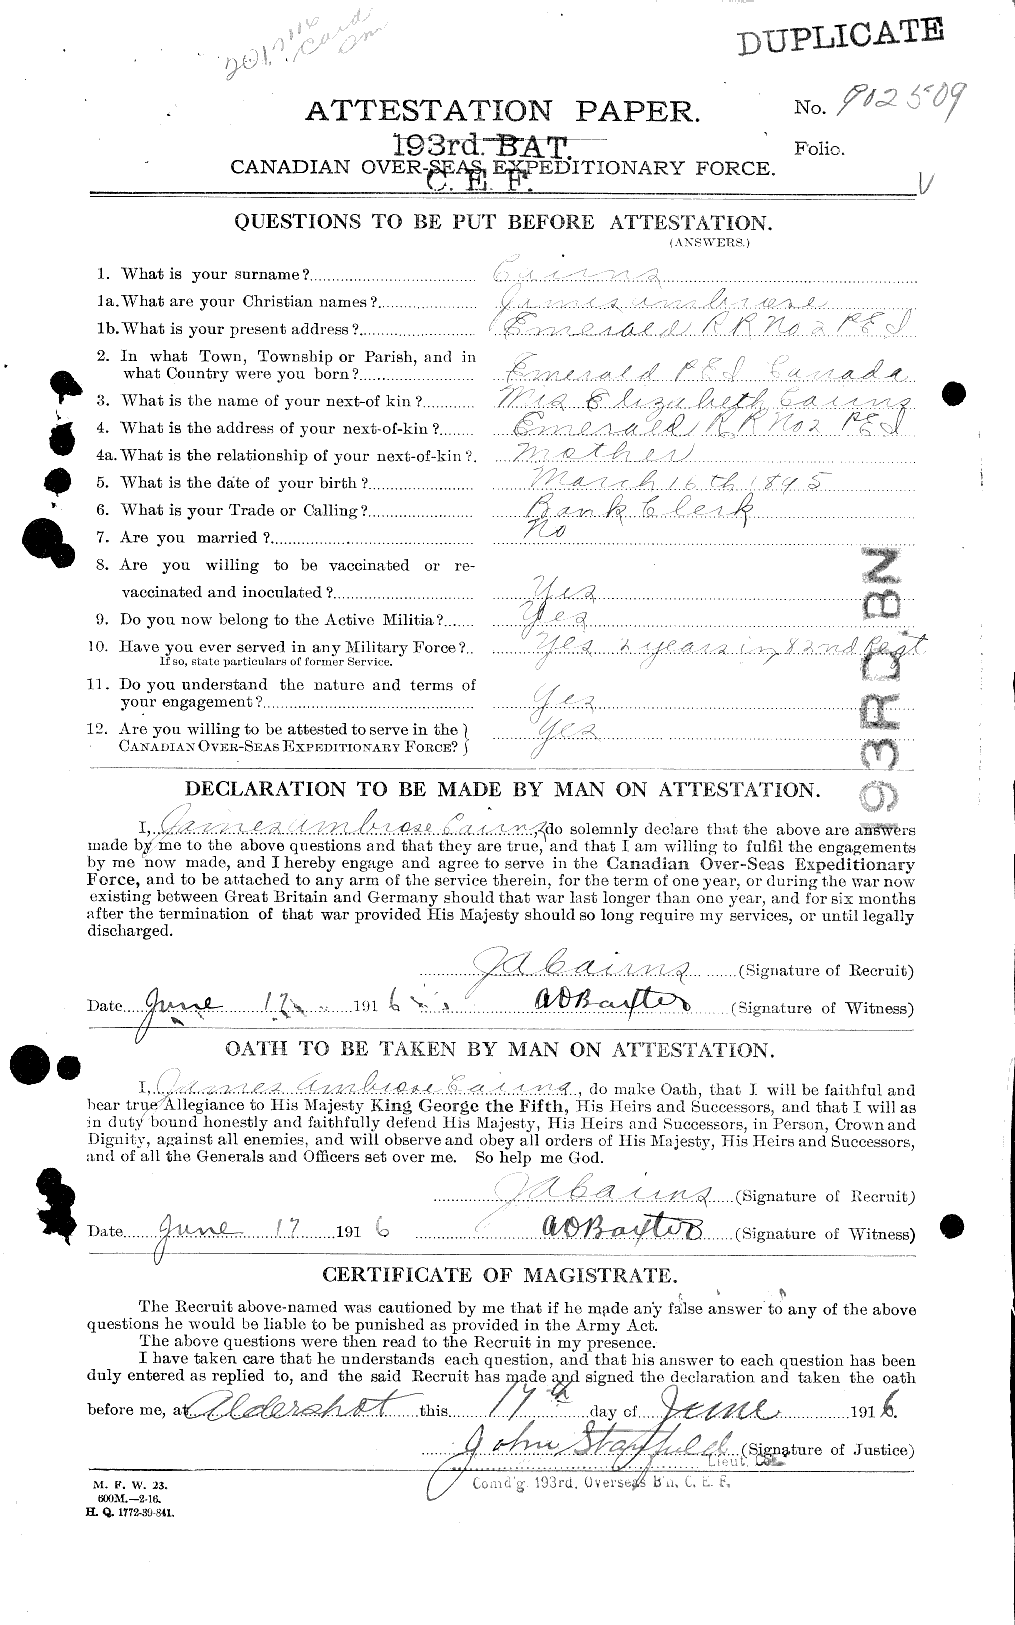 Personnel Records of the First World War - CEF 000514a